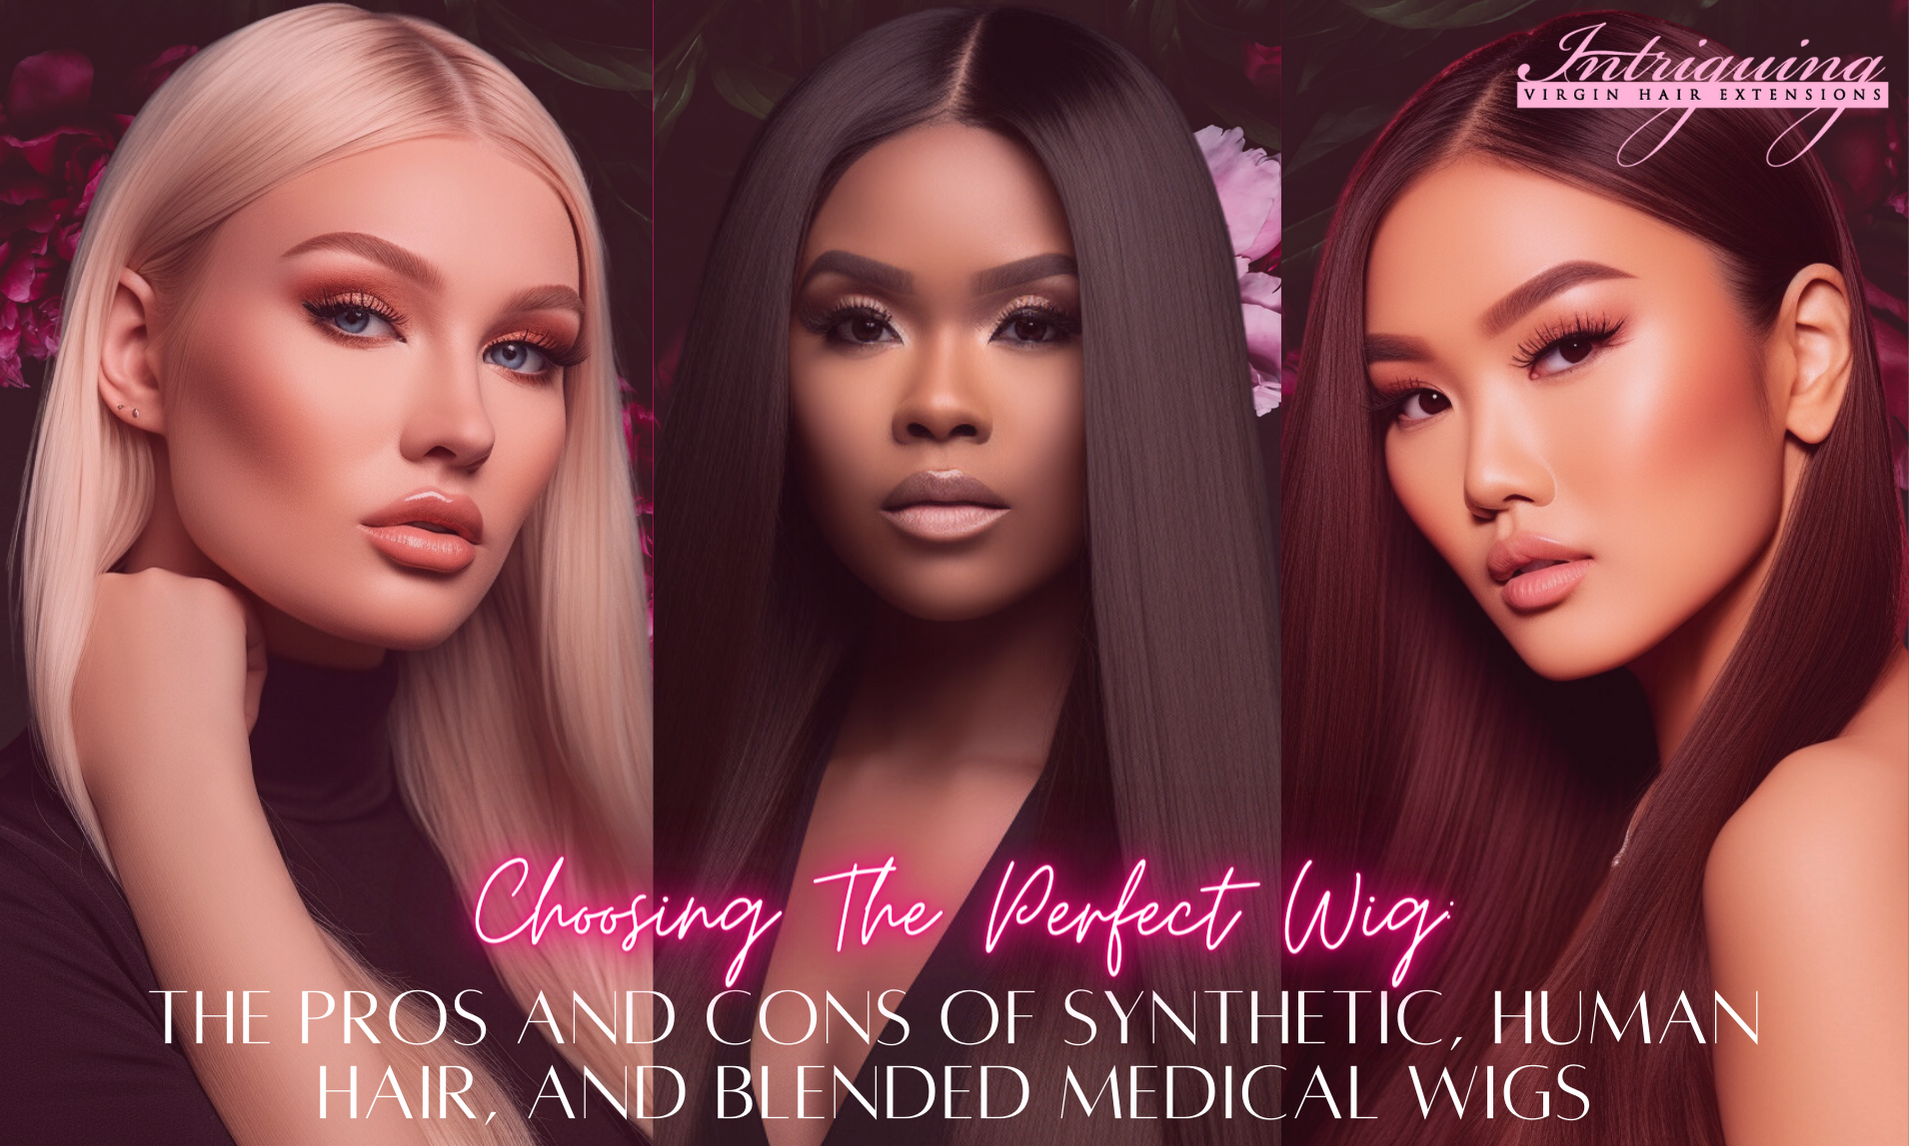 Choosing the Perfect Wig: The Pros and Cons of Synthetic, Human Hair, and Blended Medical Wigs